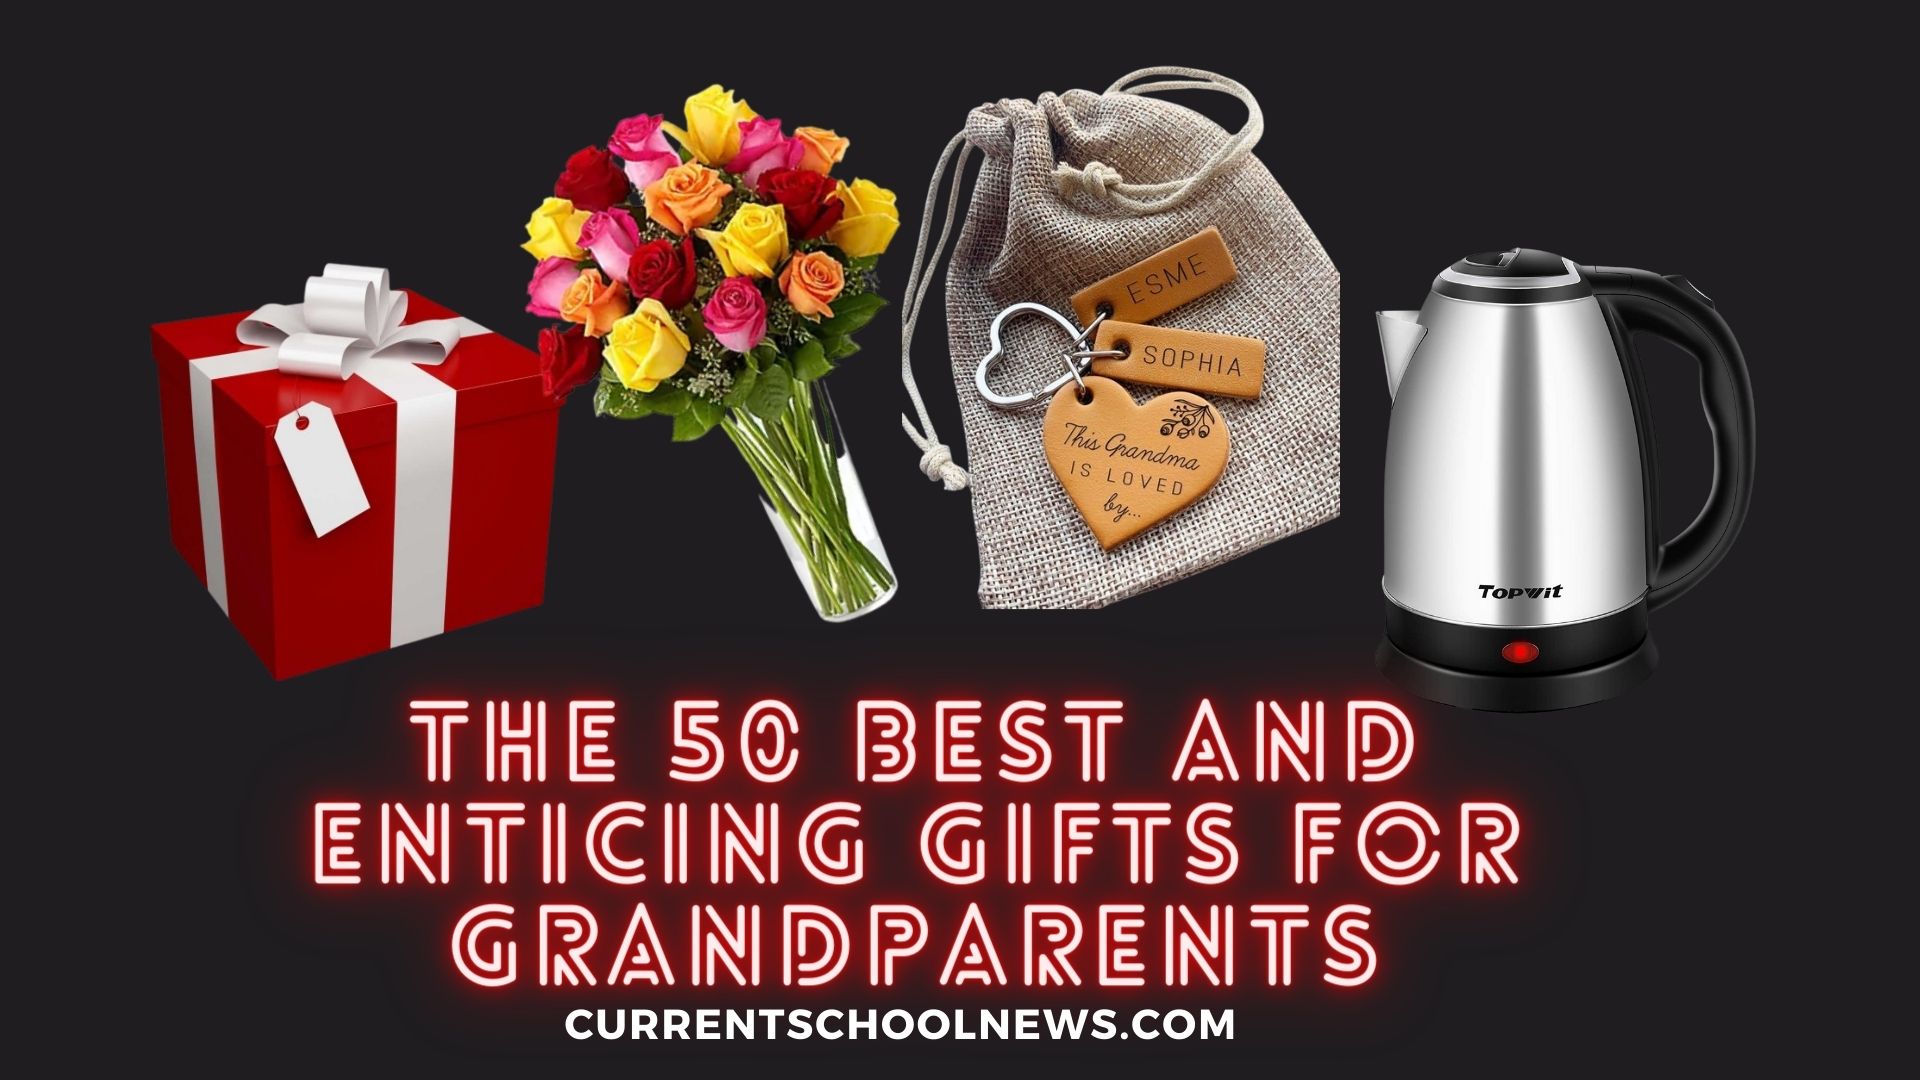 The 50 Best and Enticing Gifts for Grandparents in 2022